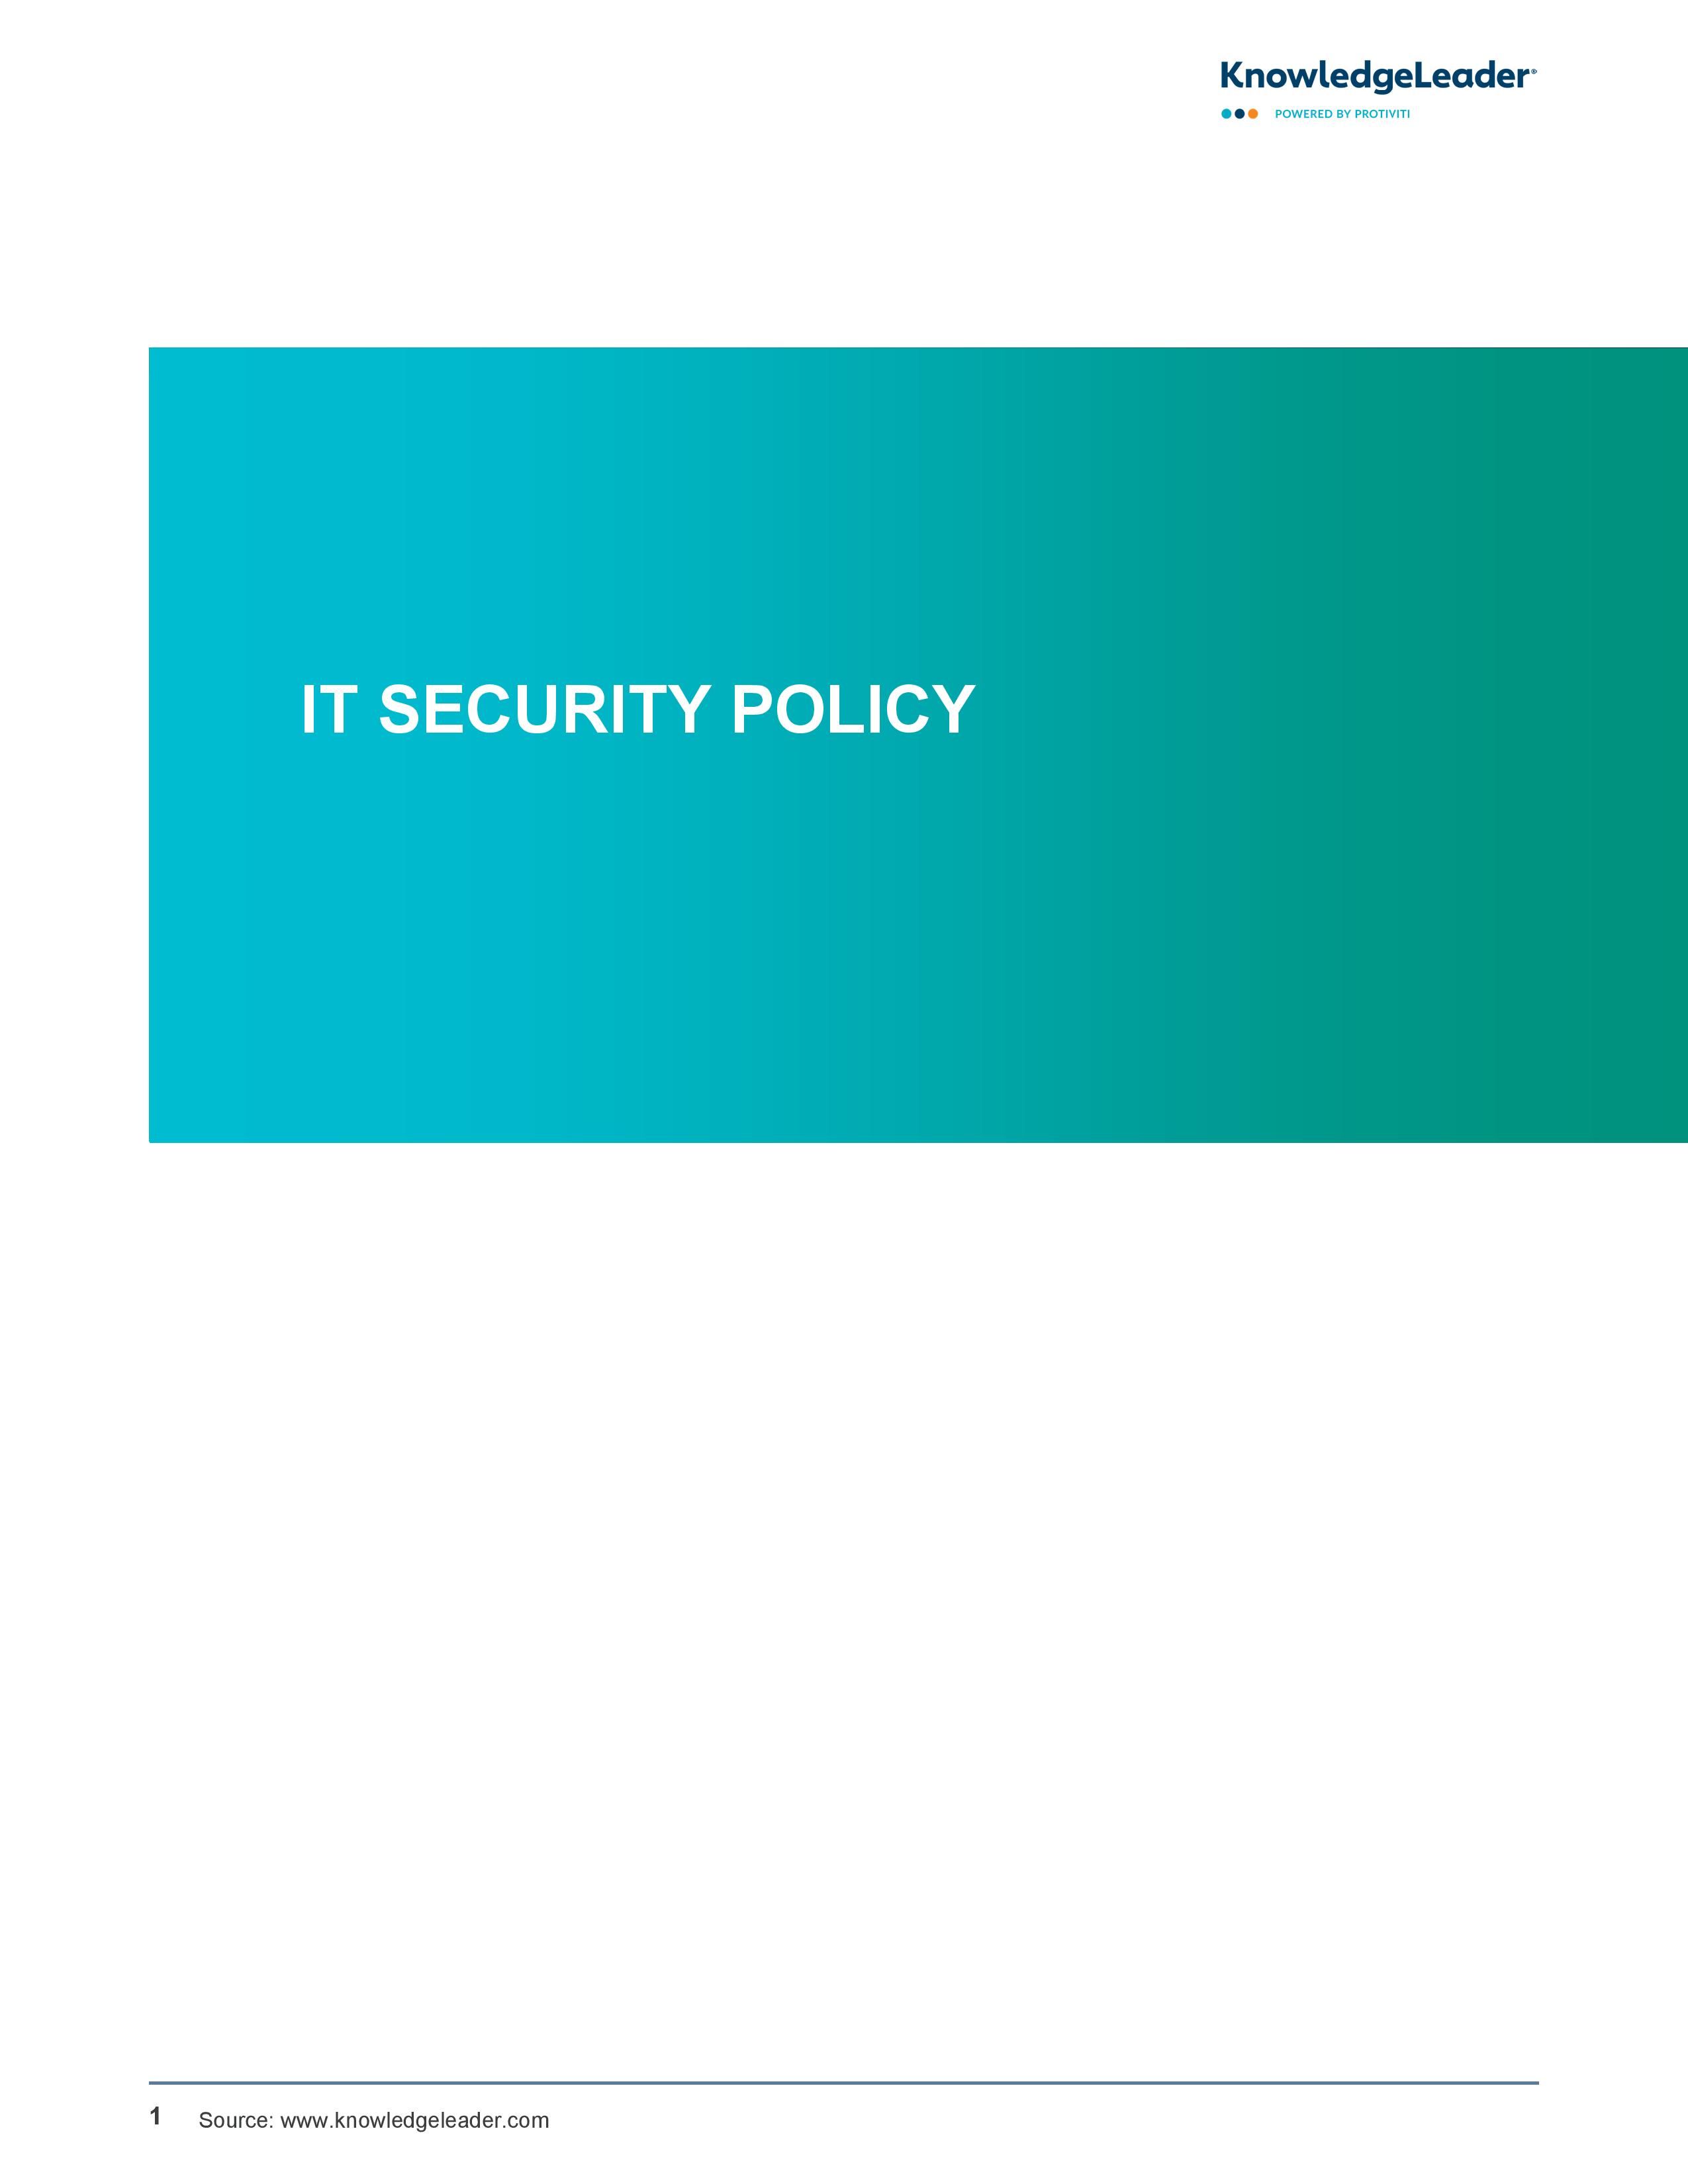  screenshot of the first page of IT Security Policy